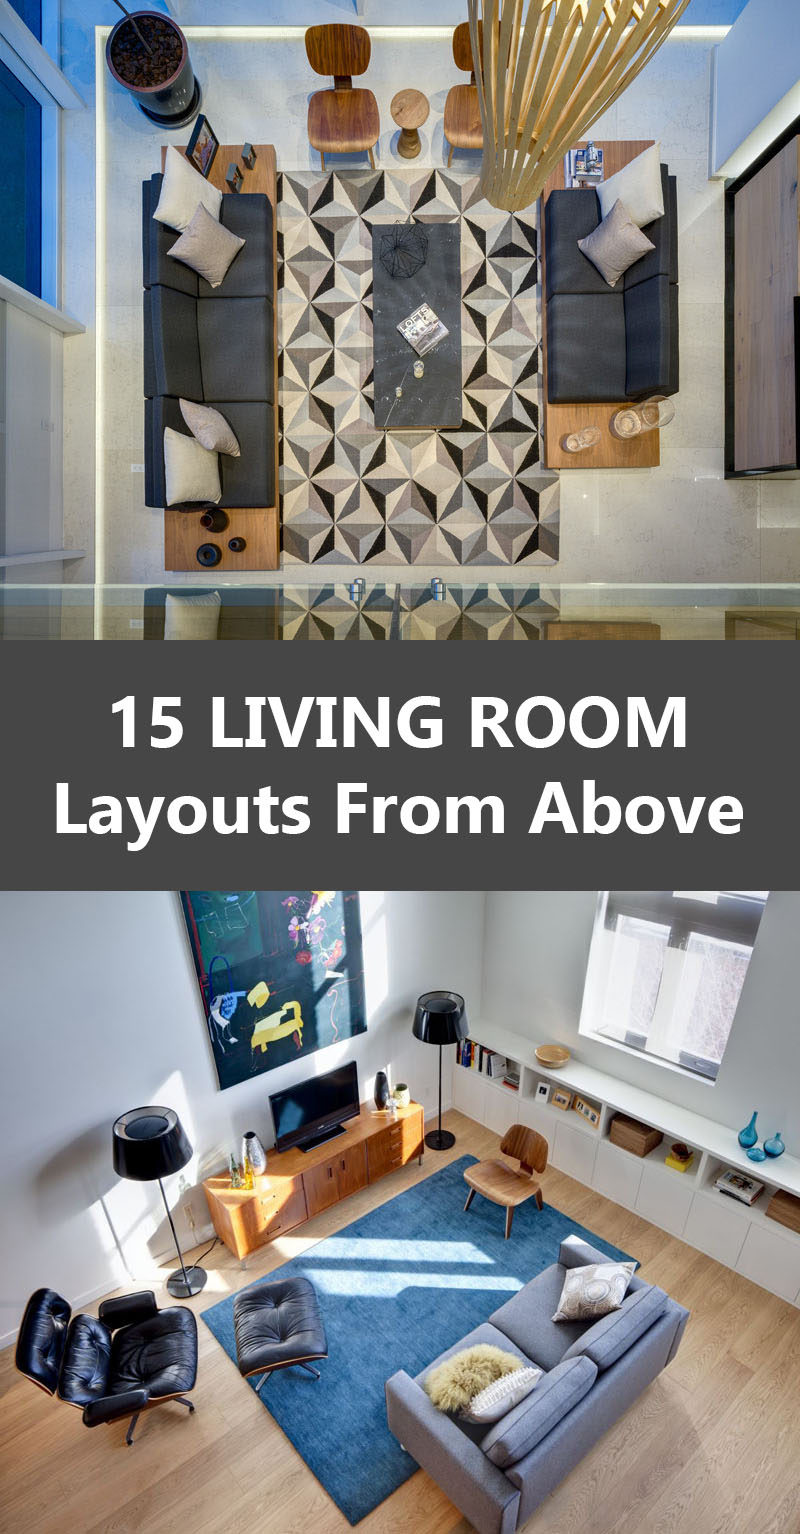 Get some interior design ideas by looking at 15 living room layouts from above